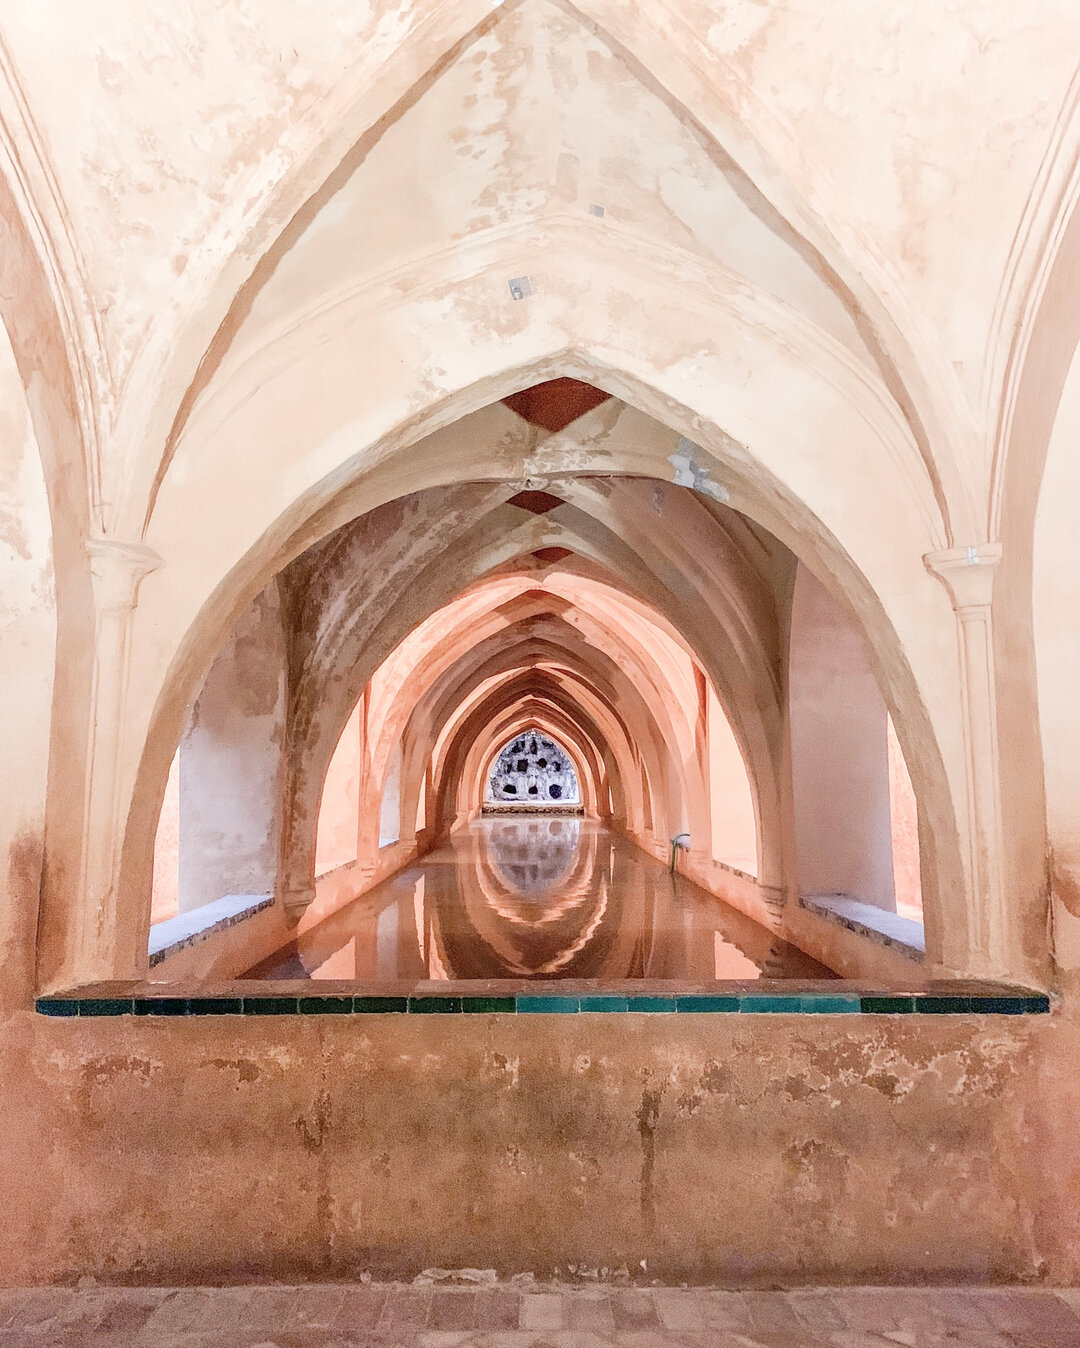 Spanish architecture always amazes me- especially Moorish-influenced architecture like this incredible subterranean bath in Seville. We&rsquo;ll be all the way up the Spanish coast this May, exploring the land of cava, the Pened&eacute;s! ​​​​​​​​​
W